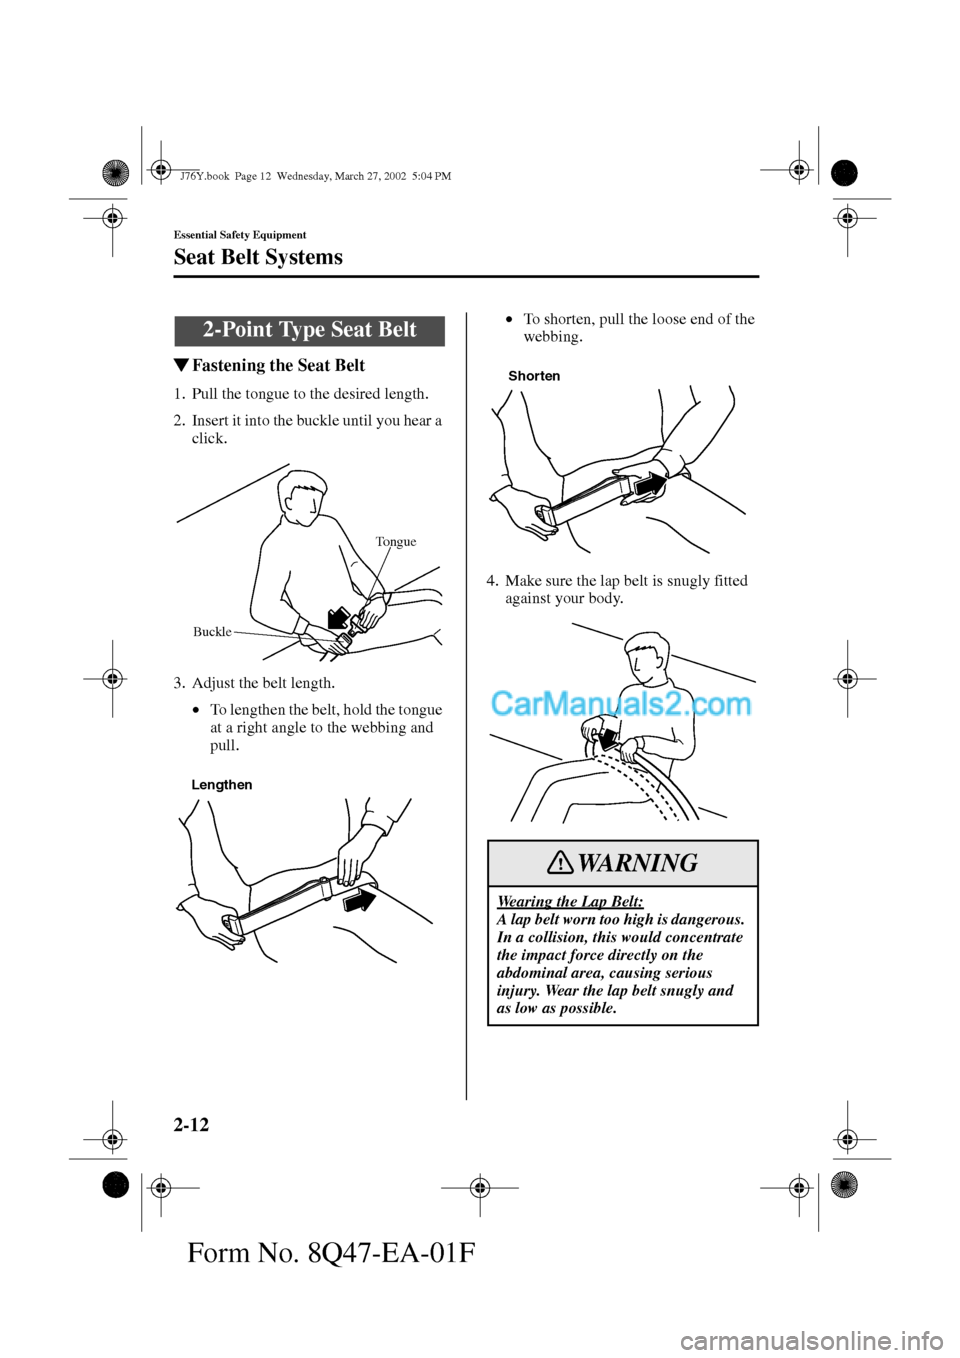 MAZDA MODEL MILLENIA 2002   (in English) User Guide 2-12
Essential Safety Equipment
Seat Belt Systems
Form No. 8Q47-EA-01F
Fastening the Seat Belt
1. Pull the tongue to the desired length.
2. Insert it into the buckle until you hear a 
click.
3. Adjus